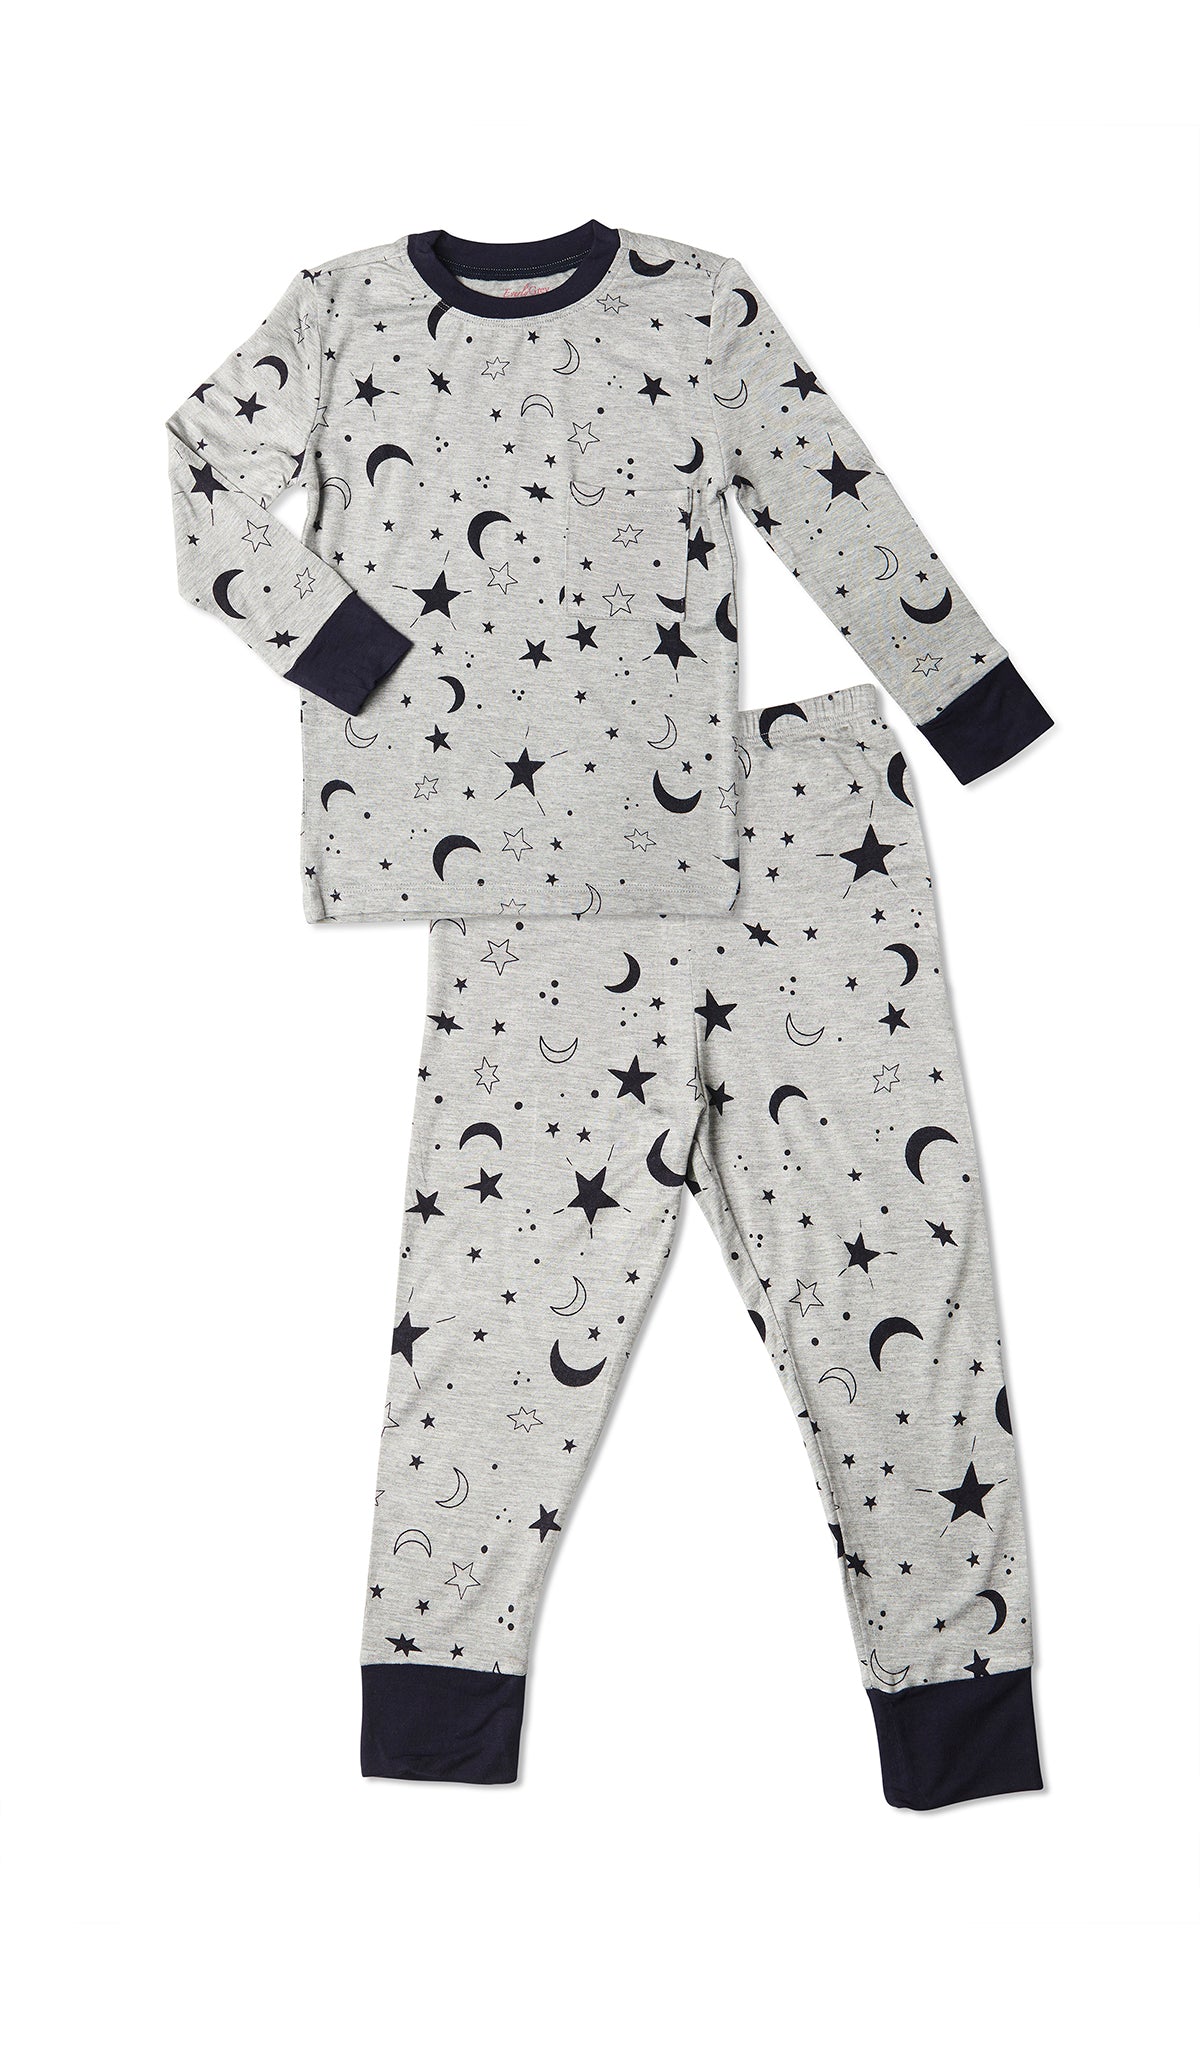 Twinkle Night Emerson Baby 2-Piece Pant PJ. Long sleeve top with cuff trim and long pant with cuff trim.